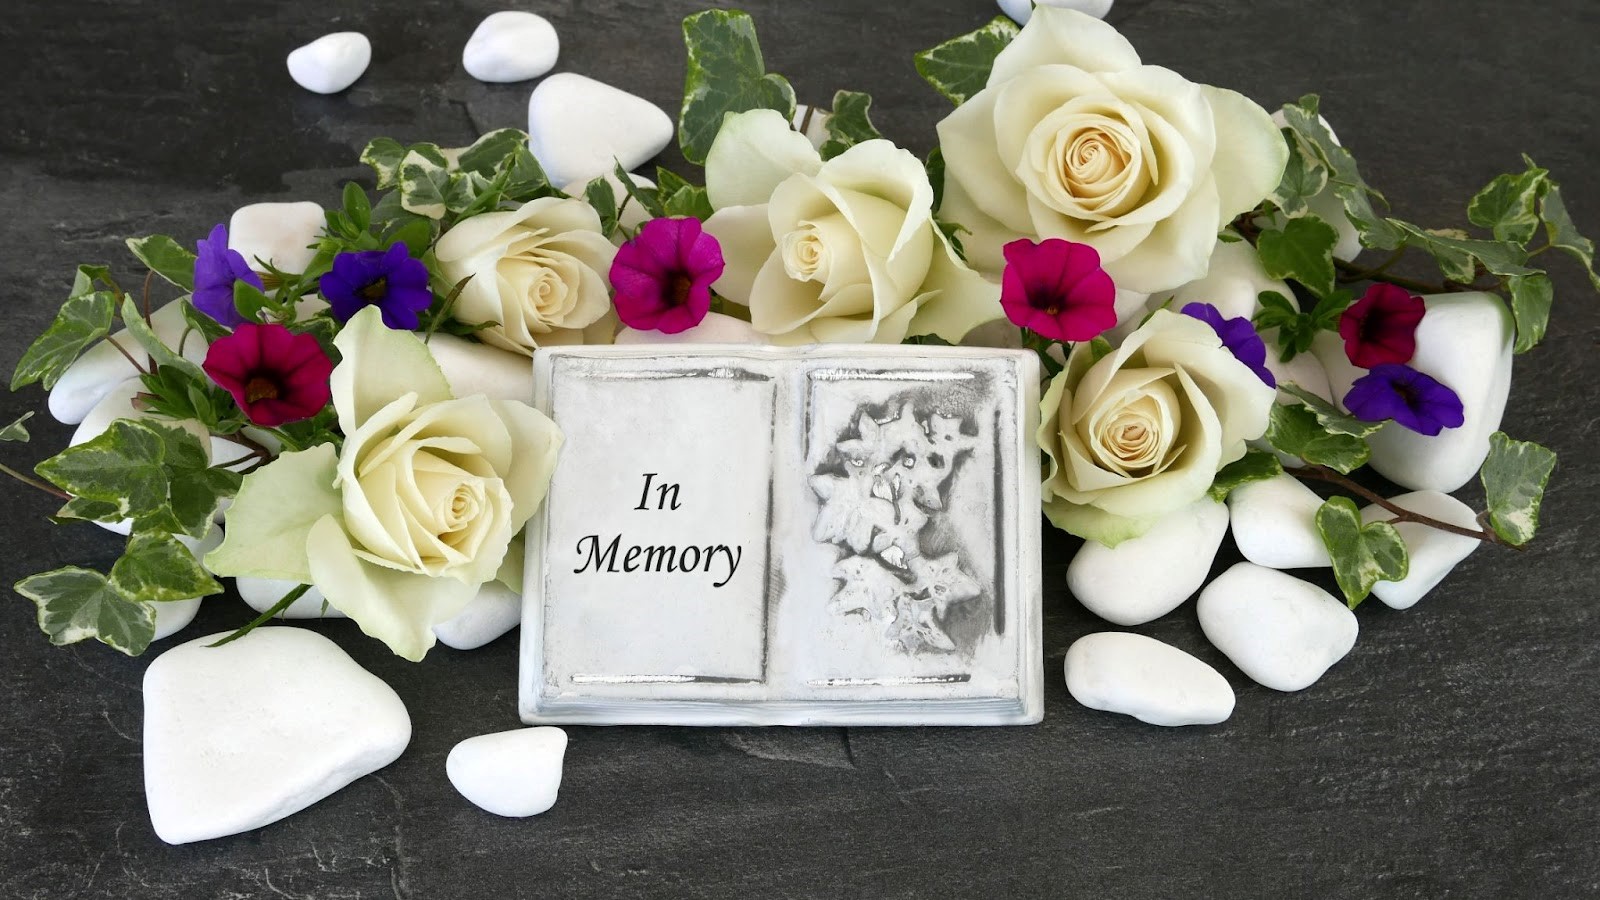 Photo of a bouquet of flowers and a book that says "In Memory"